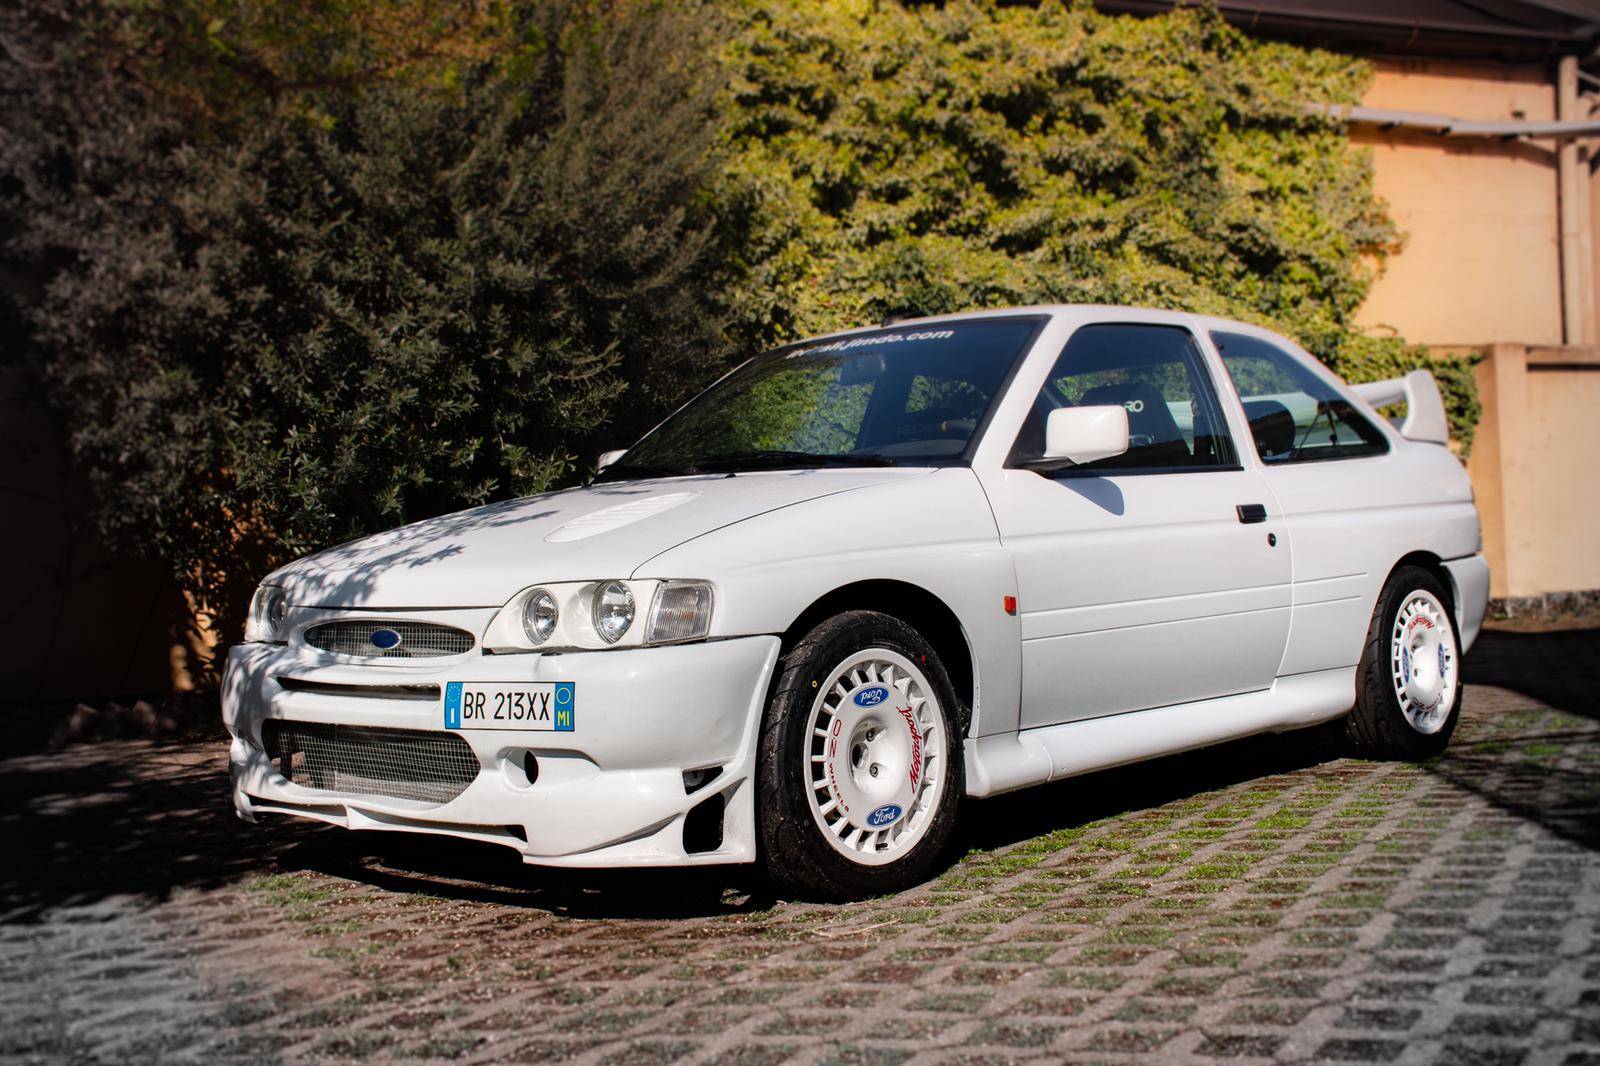 For Sale Ford Escort RS Cosworth (1992) offered for AUD